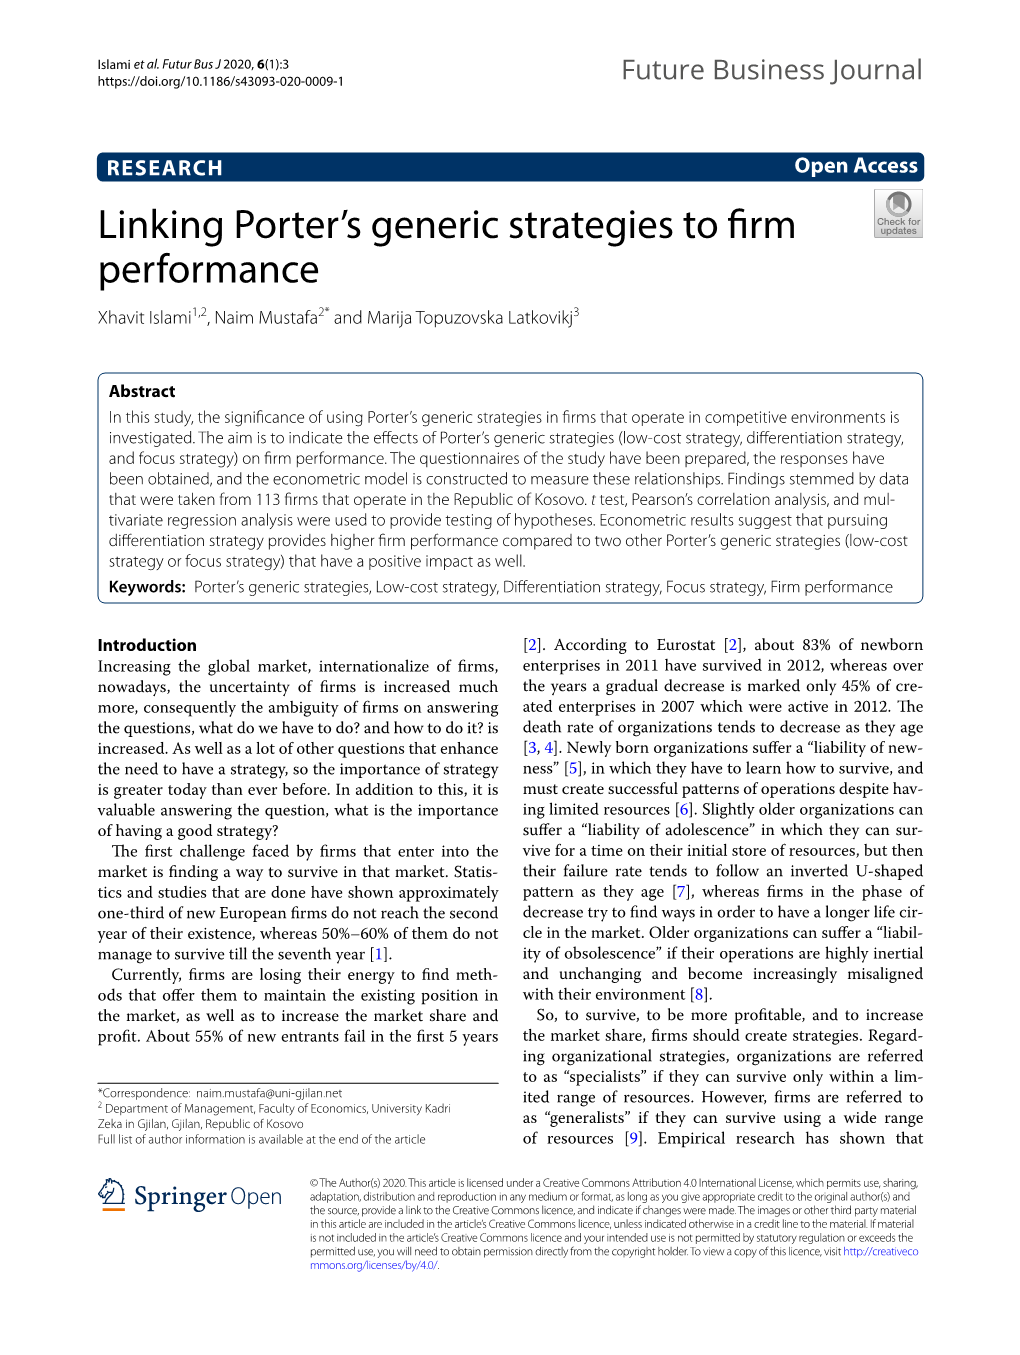 Linking Porter's Generic Strategies to Firm Performance